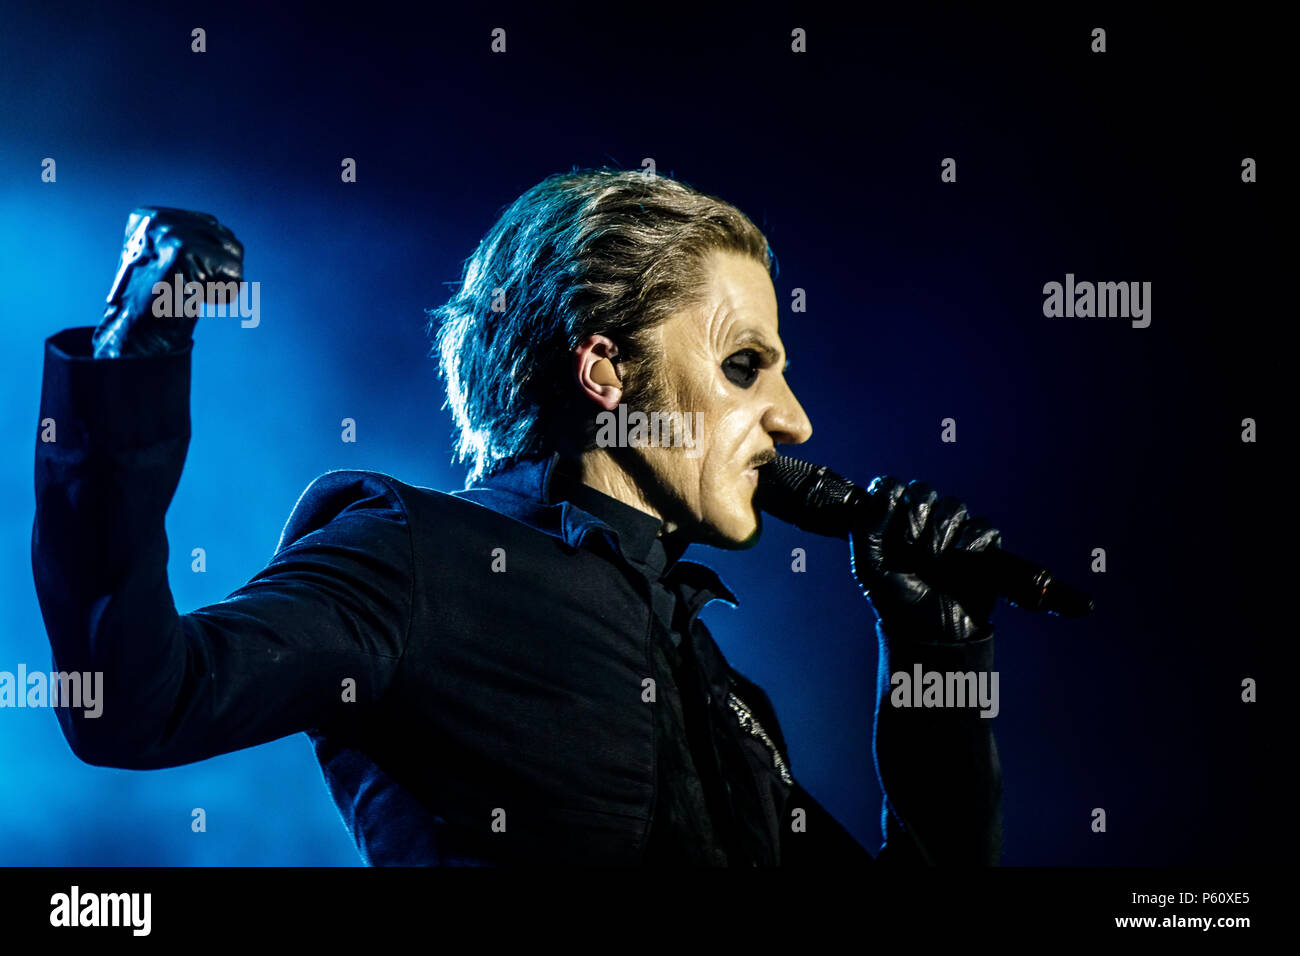 Denmark, Copenhagen - June 24, The Swedish doom metal band Ghost performs a live concert during the Danish metal Copenhell 2018 in Copenhagen. Here vocalist Tobias Forge a.k.a. Papa